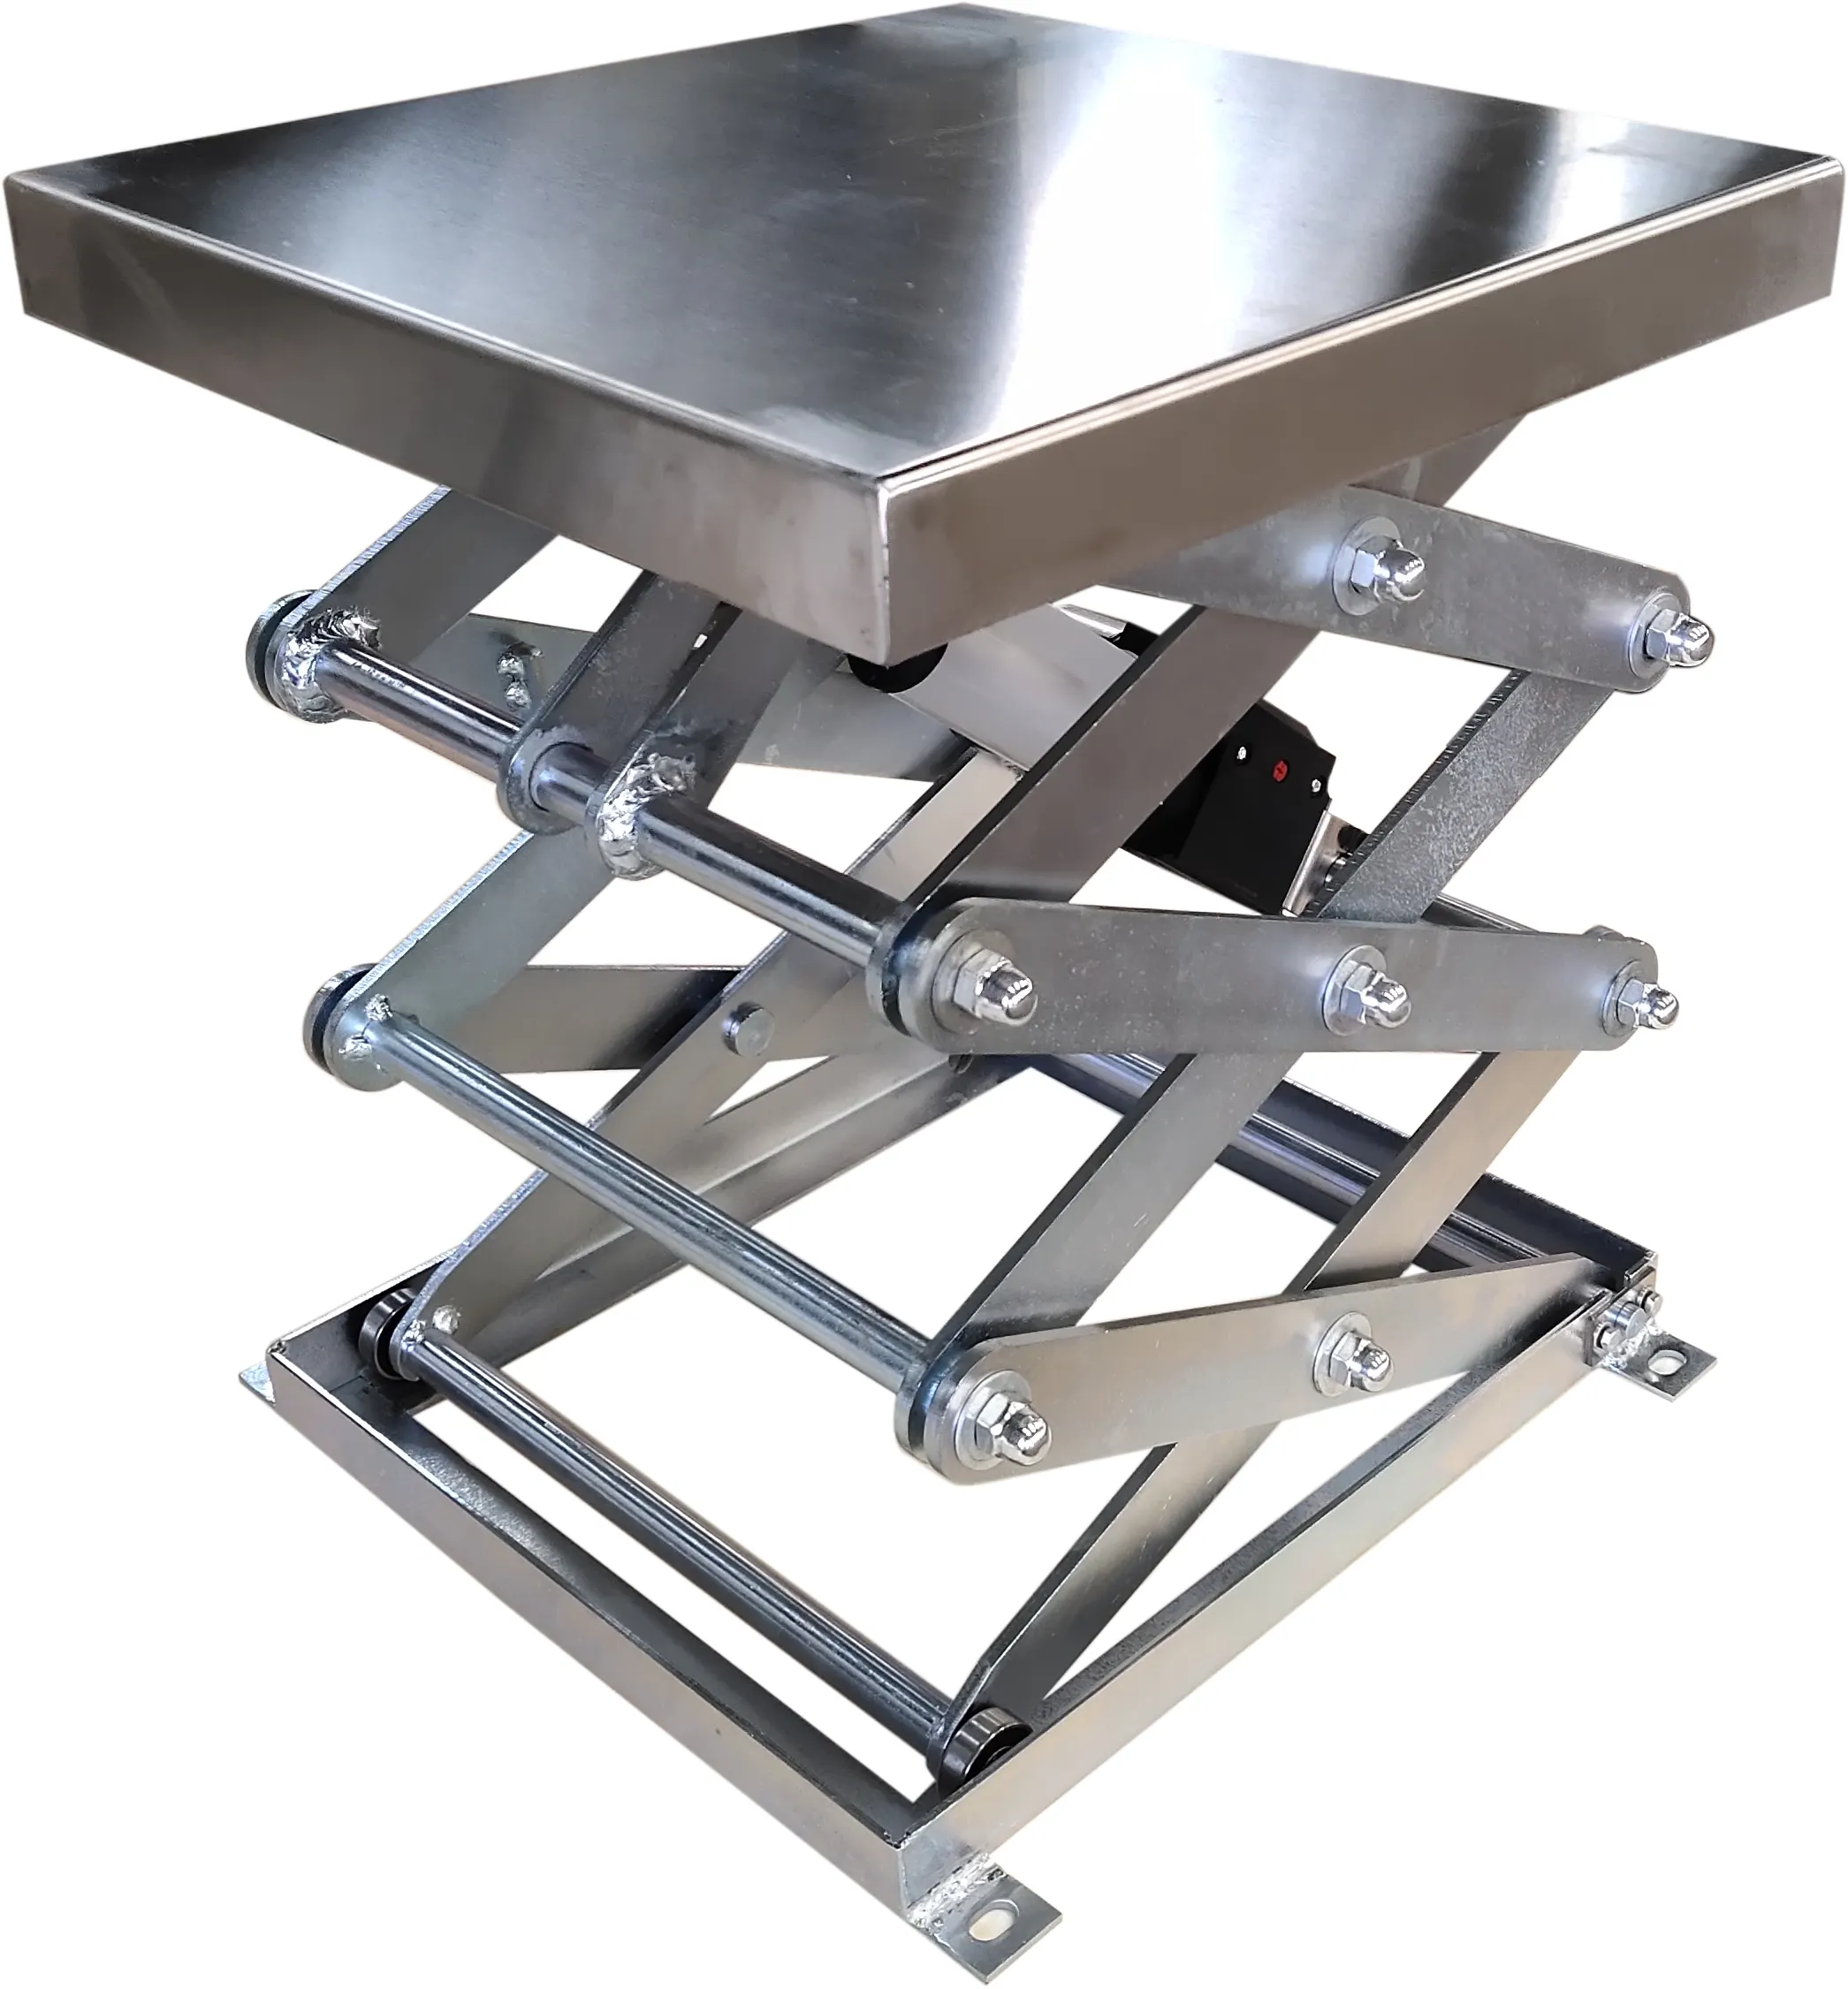 Stainless Steel Lift Table For Lab Small Scissor Lift Table Adjustable Hydraulic Lift